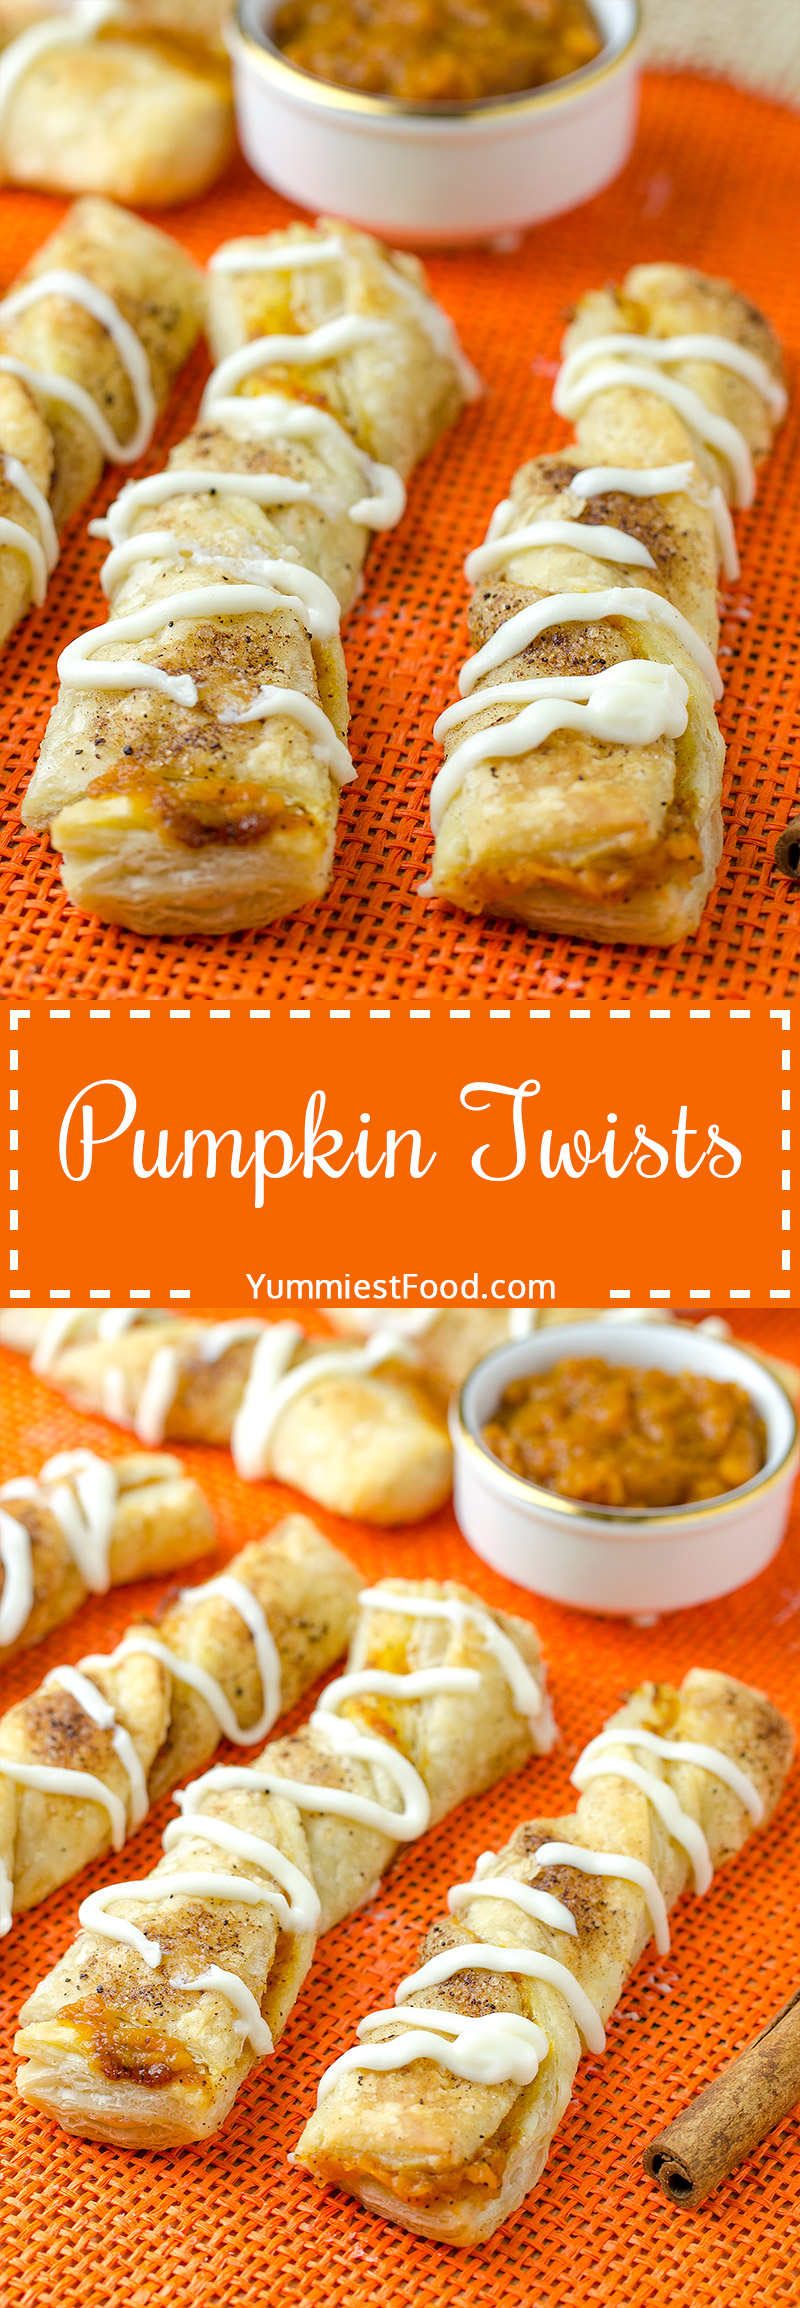 Pumpkin Twists - Perfect combination of Pumpkin and Cinnamon and perfect fall dessert 